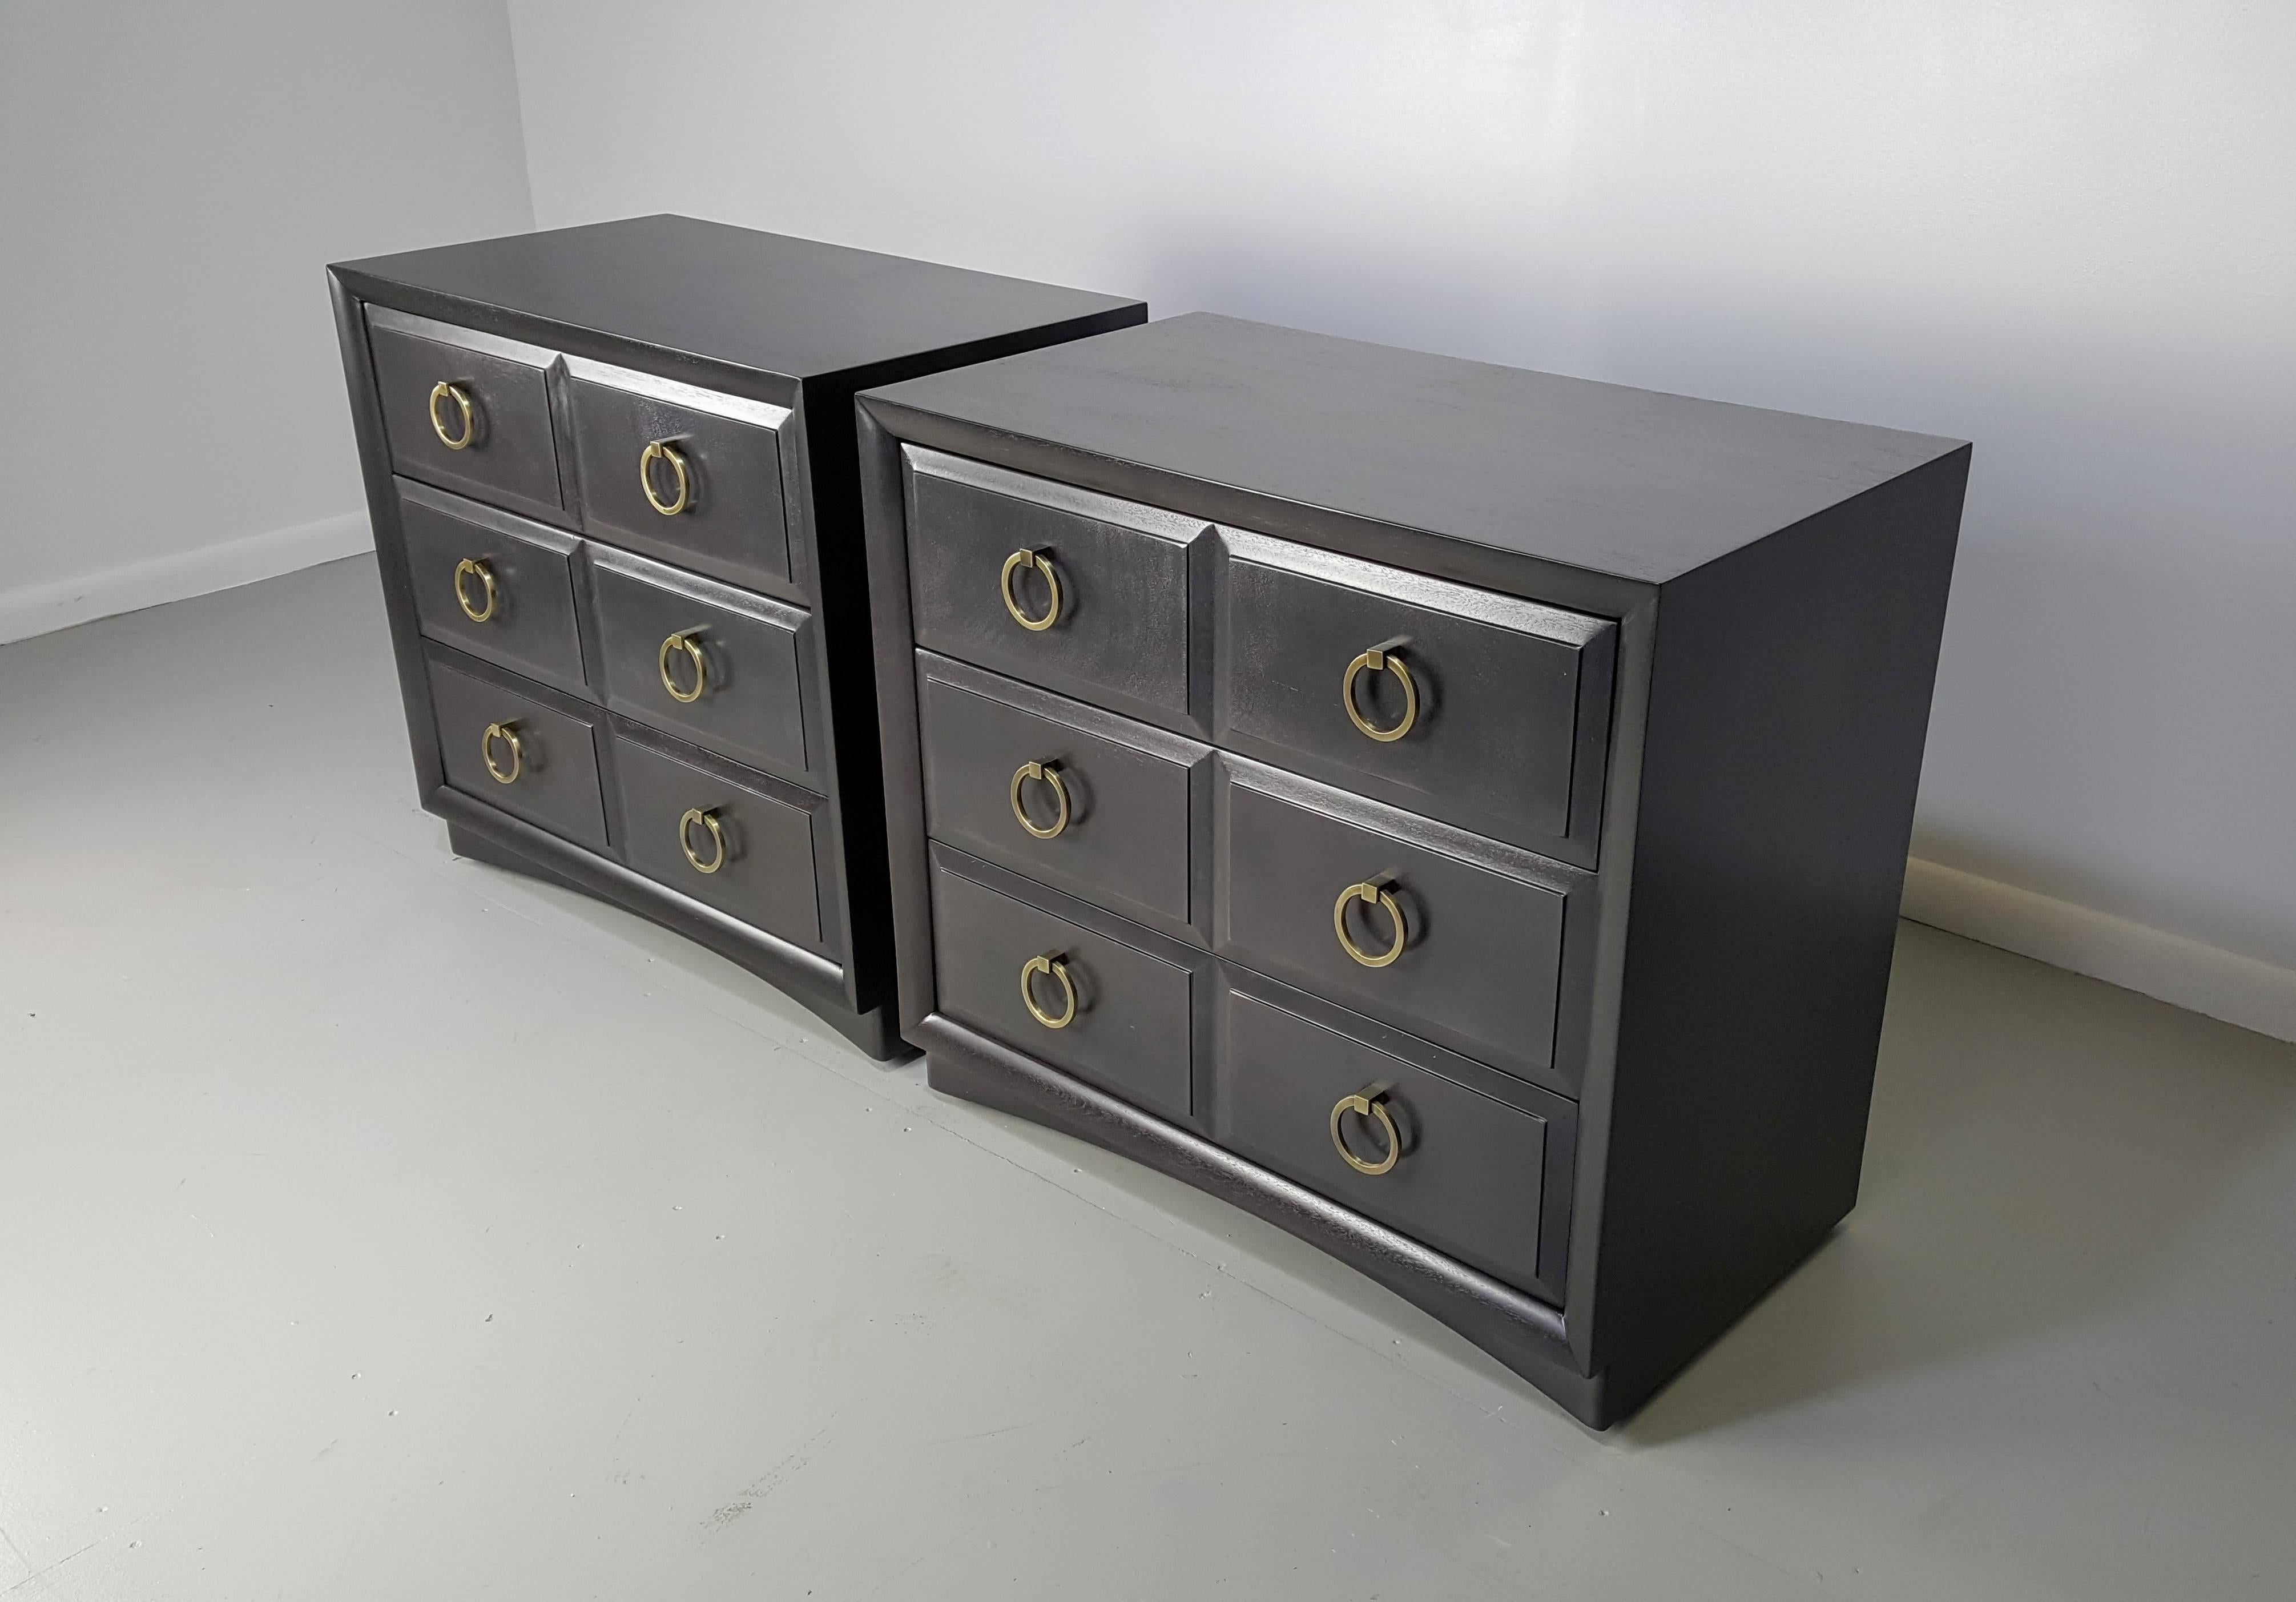 Pair of chests by T.H. Robsjohn-GIbbings in a custom charcoal finish, 1950s. 

We offer free regular deliveries to NYC and Philadelphia area. Delivery to DC, MD, CT and MA are available if schedule permits, please message for a location-based